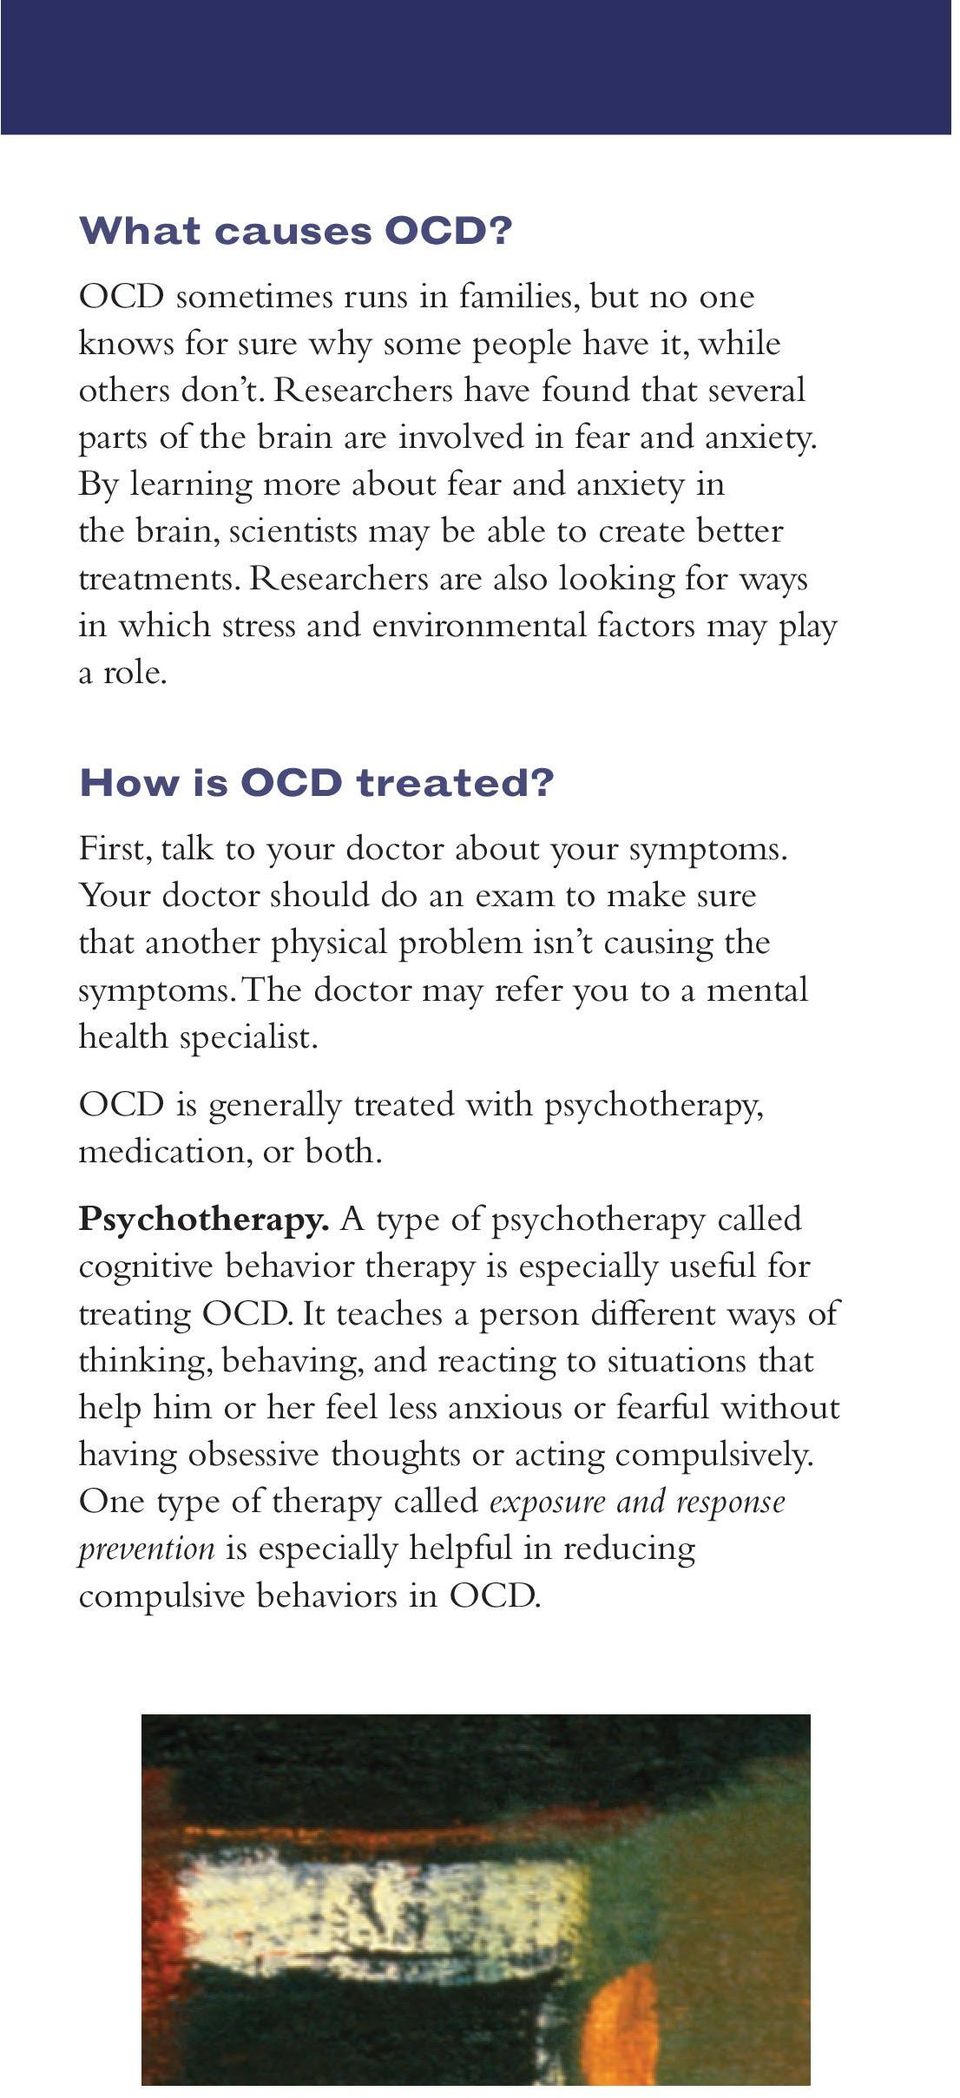 Researchers are also looking for ways in which stress and environmental factors may play a role. How is OCD treated? First, talk to your doctor about your symptoms.